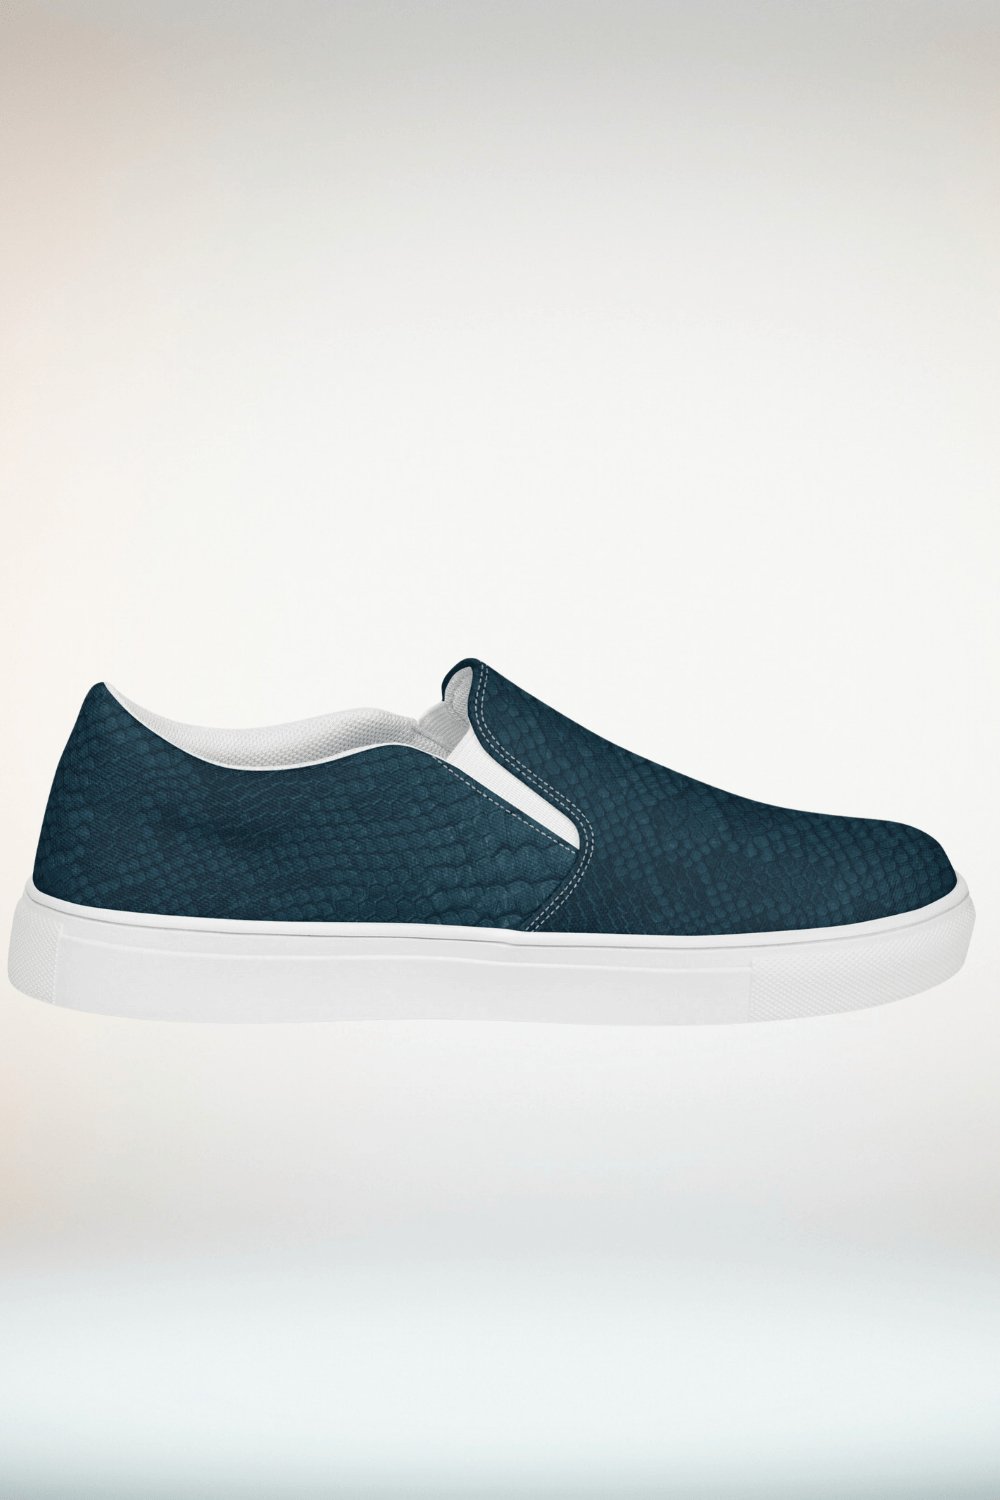 Dark Green Slip On Canvas Shoes - TGC Boutique - Slip On Shoes